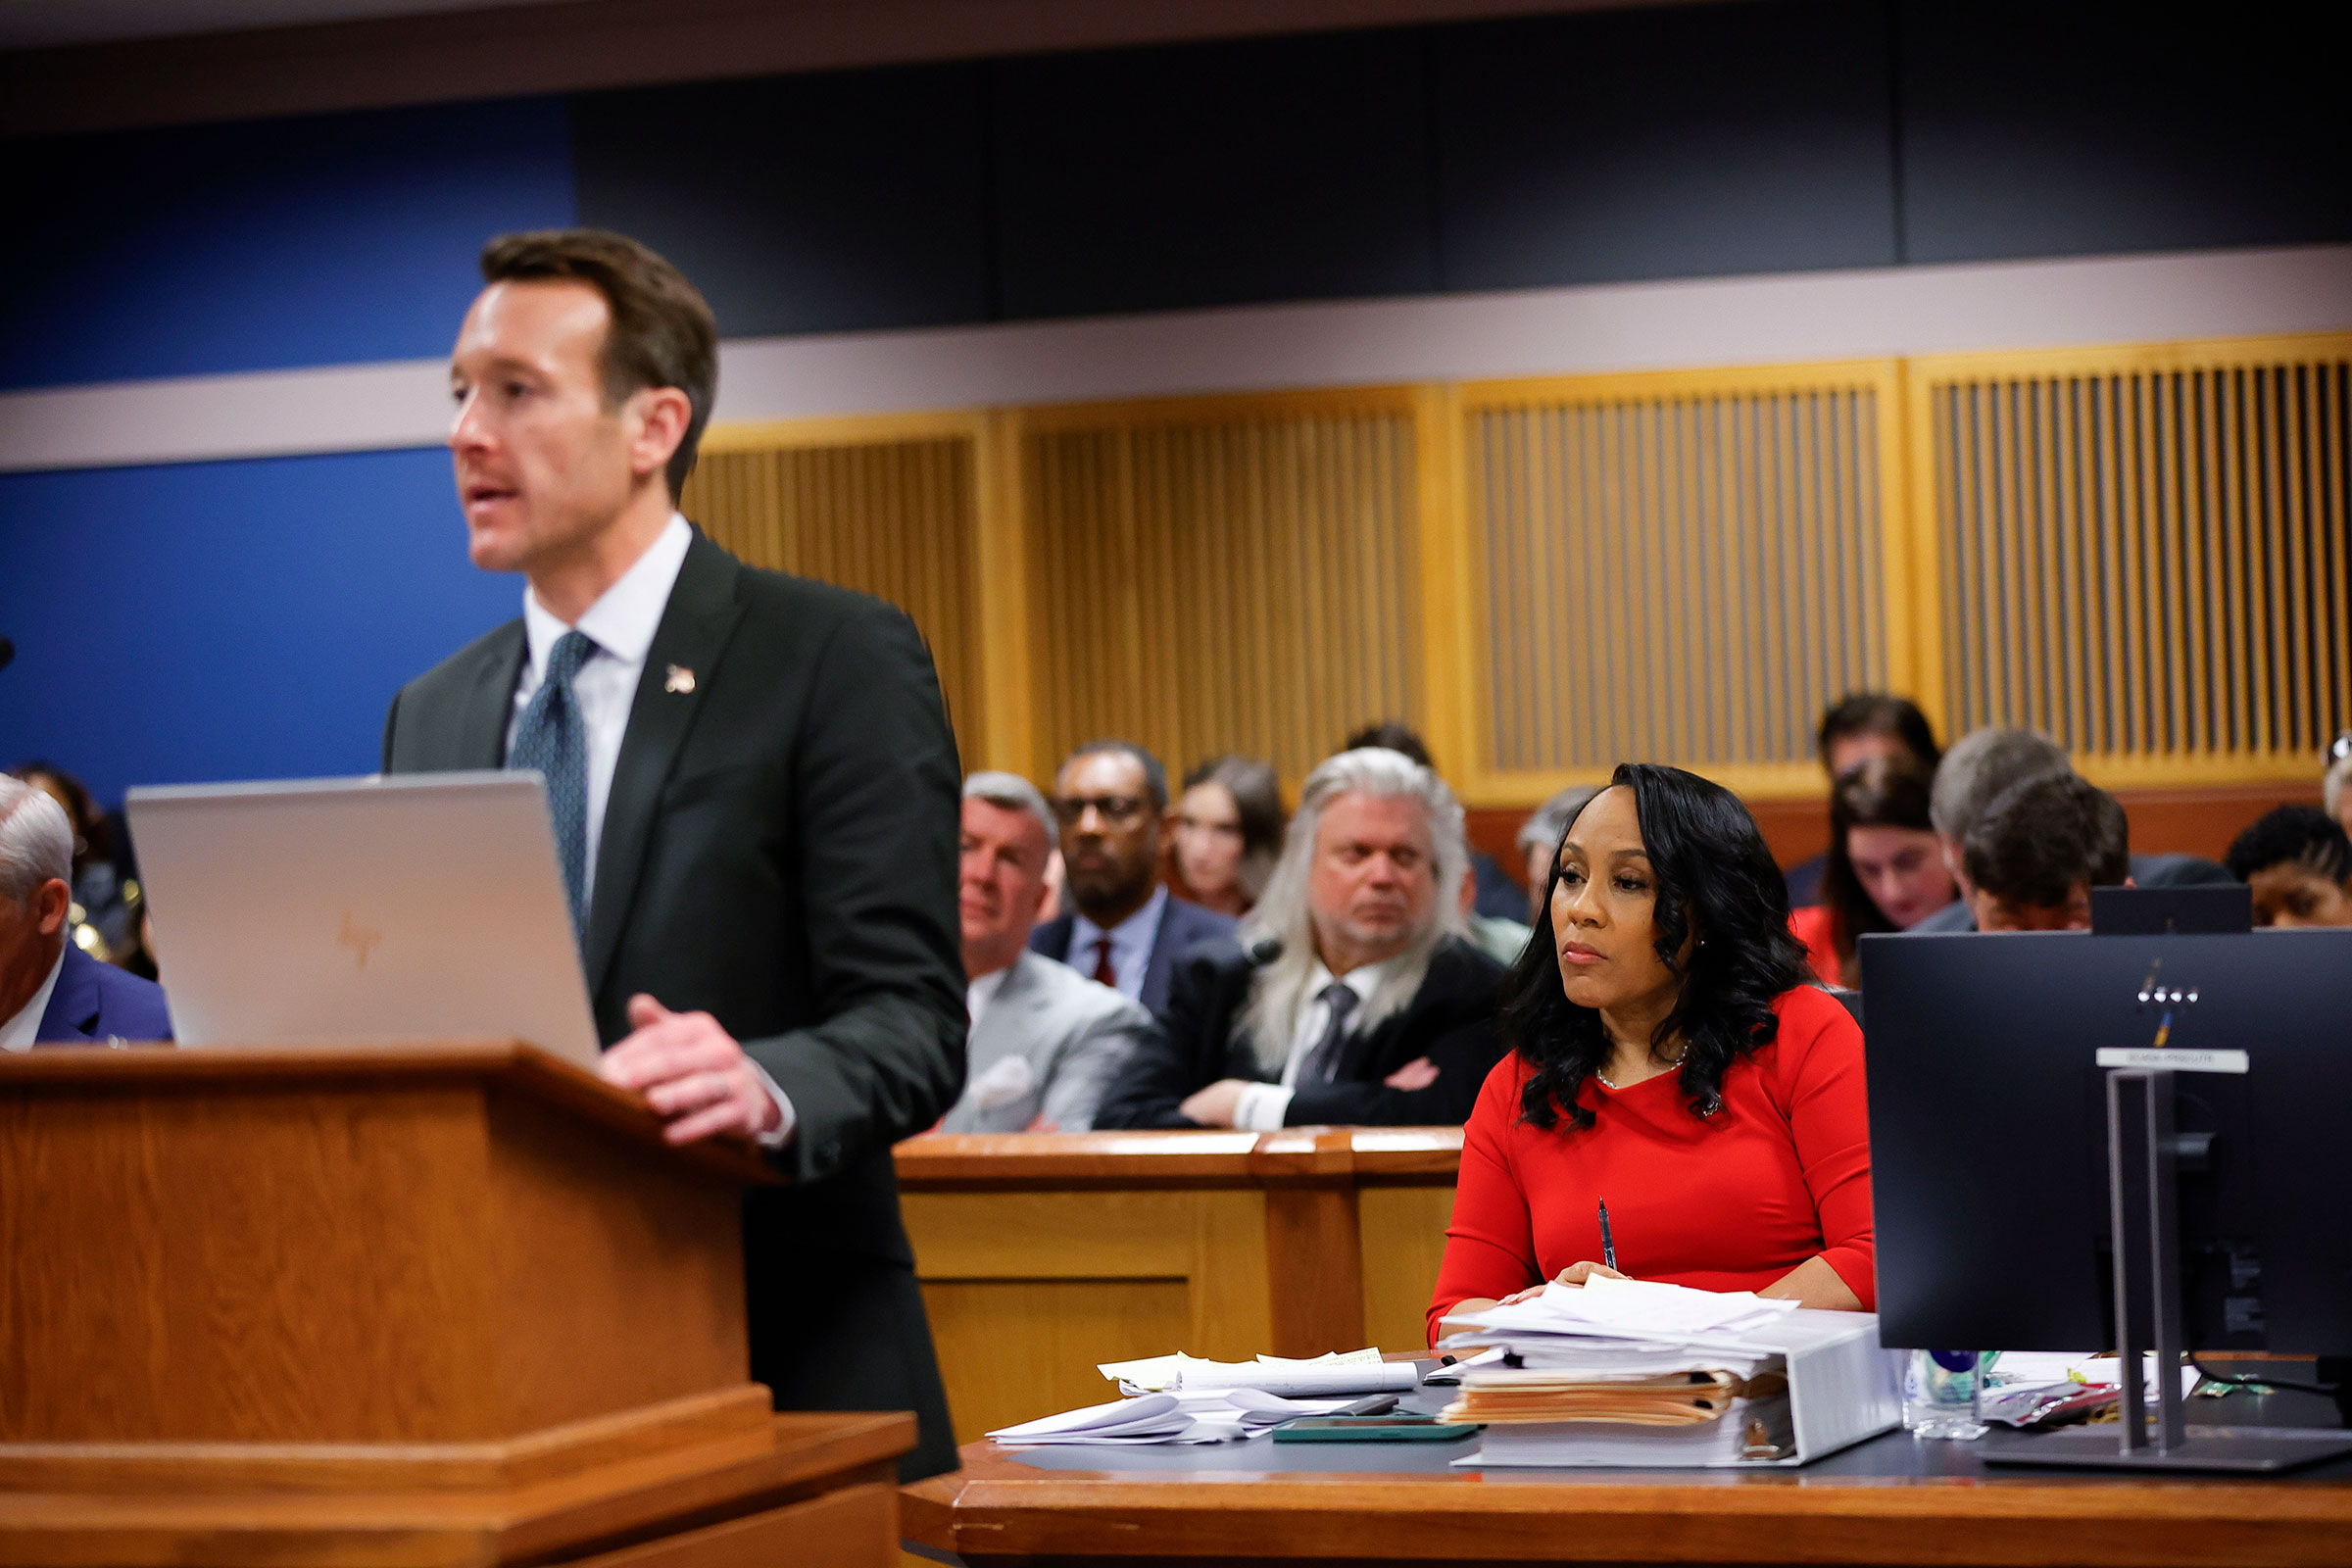 Attorney Adam Abbate speaks with Fulton County District Attorney Fani Willis looking on during a hearing on the Georgia election interference case, Friday, March, 1, in Atlanta.